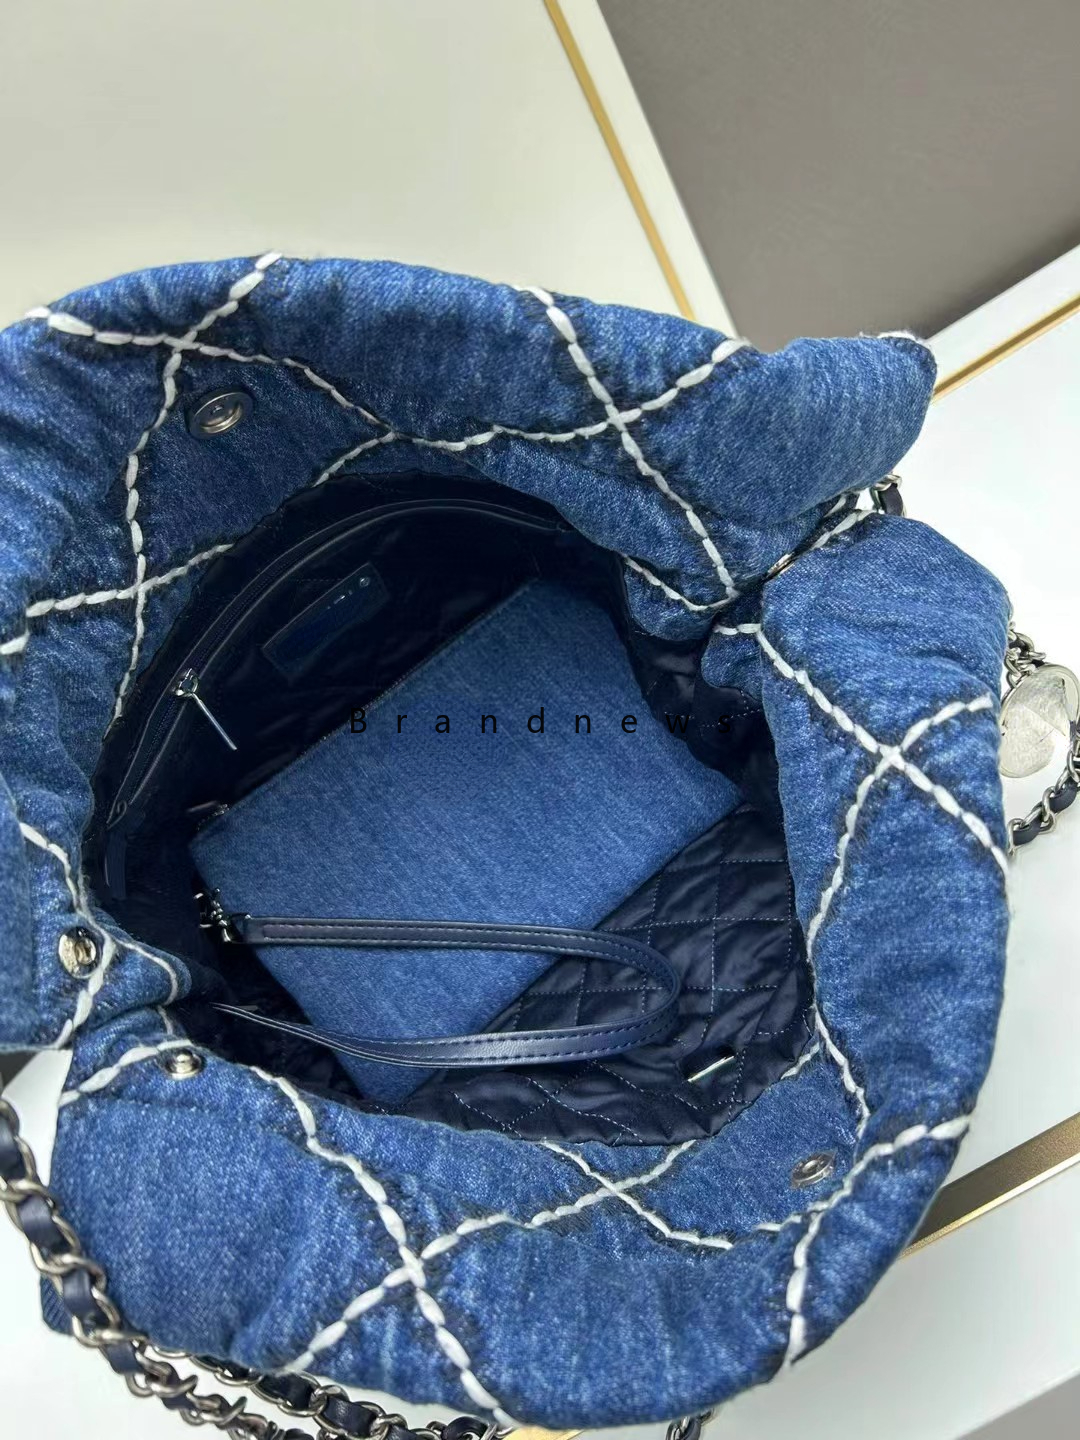 Luxury Brand Denim Shoulder Bags Classic Jean Shopping Totes With Purses Inside Silver Chain Hardware Crossbody Bag 2024 Casual Handbags Backpacks Rucksack 2720